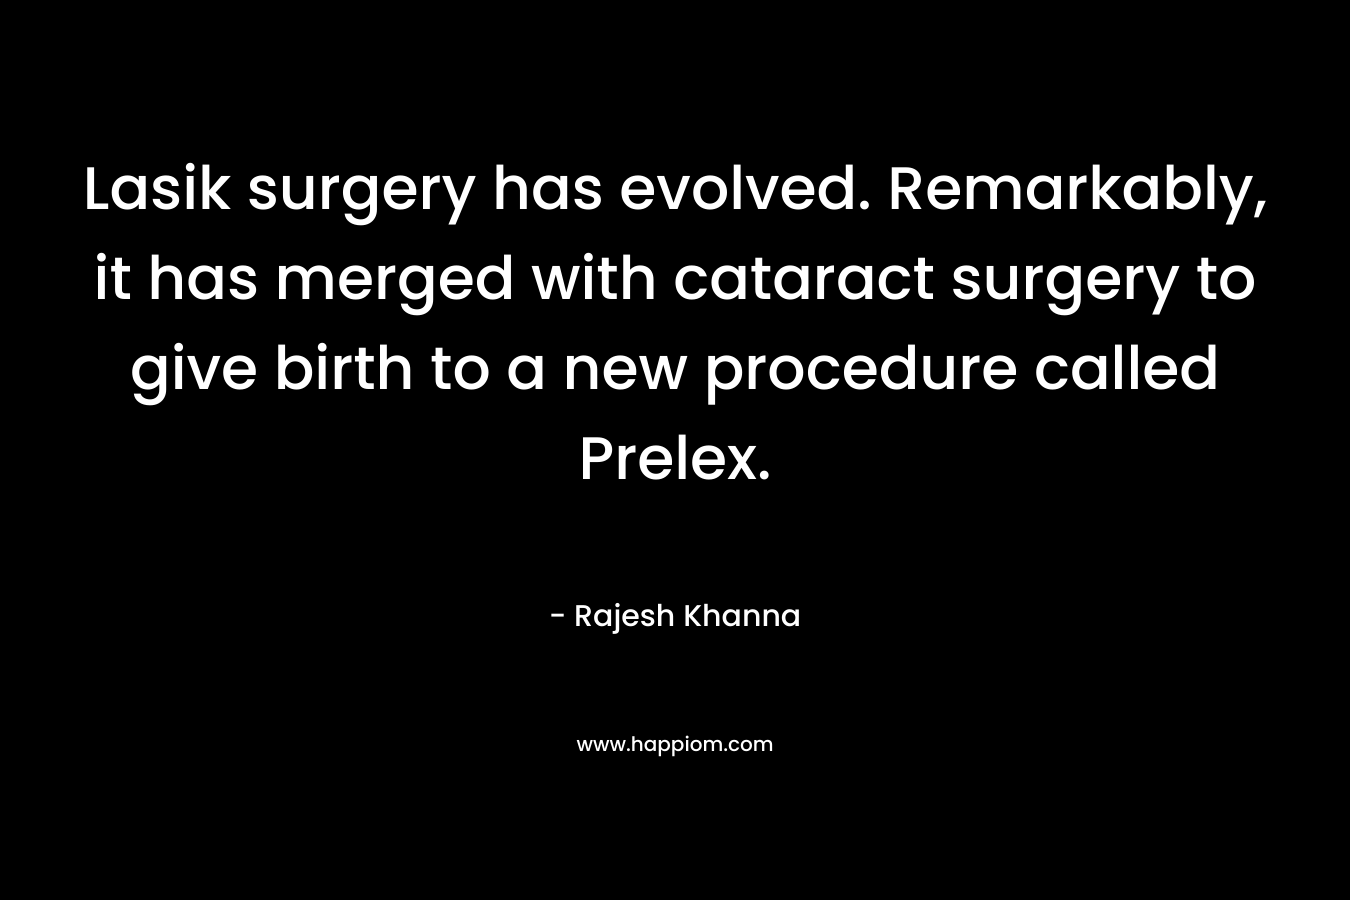 Lasik surgery has evolved. Remarkably, it has merged with cataract surgery to give birth to a new procedure called Prelex. – Rajesh Khanna